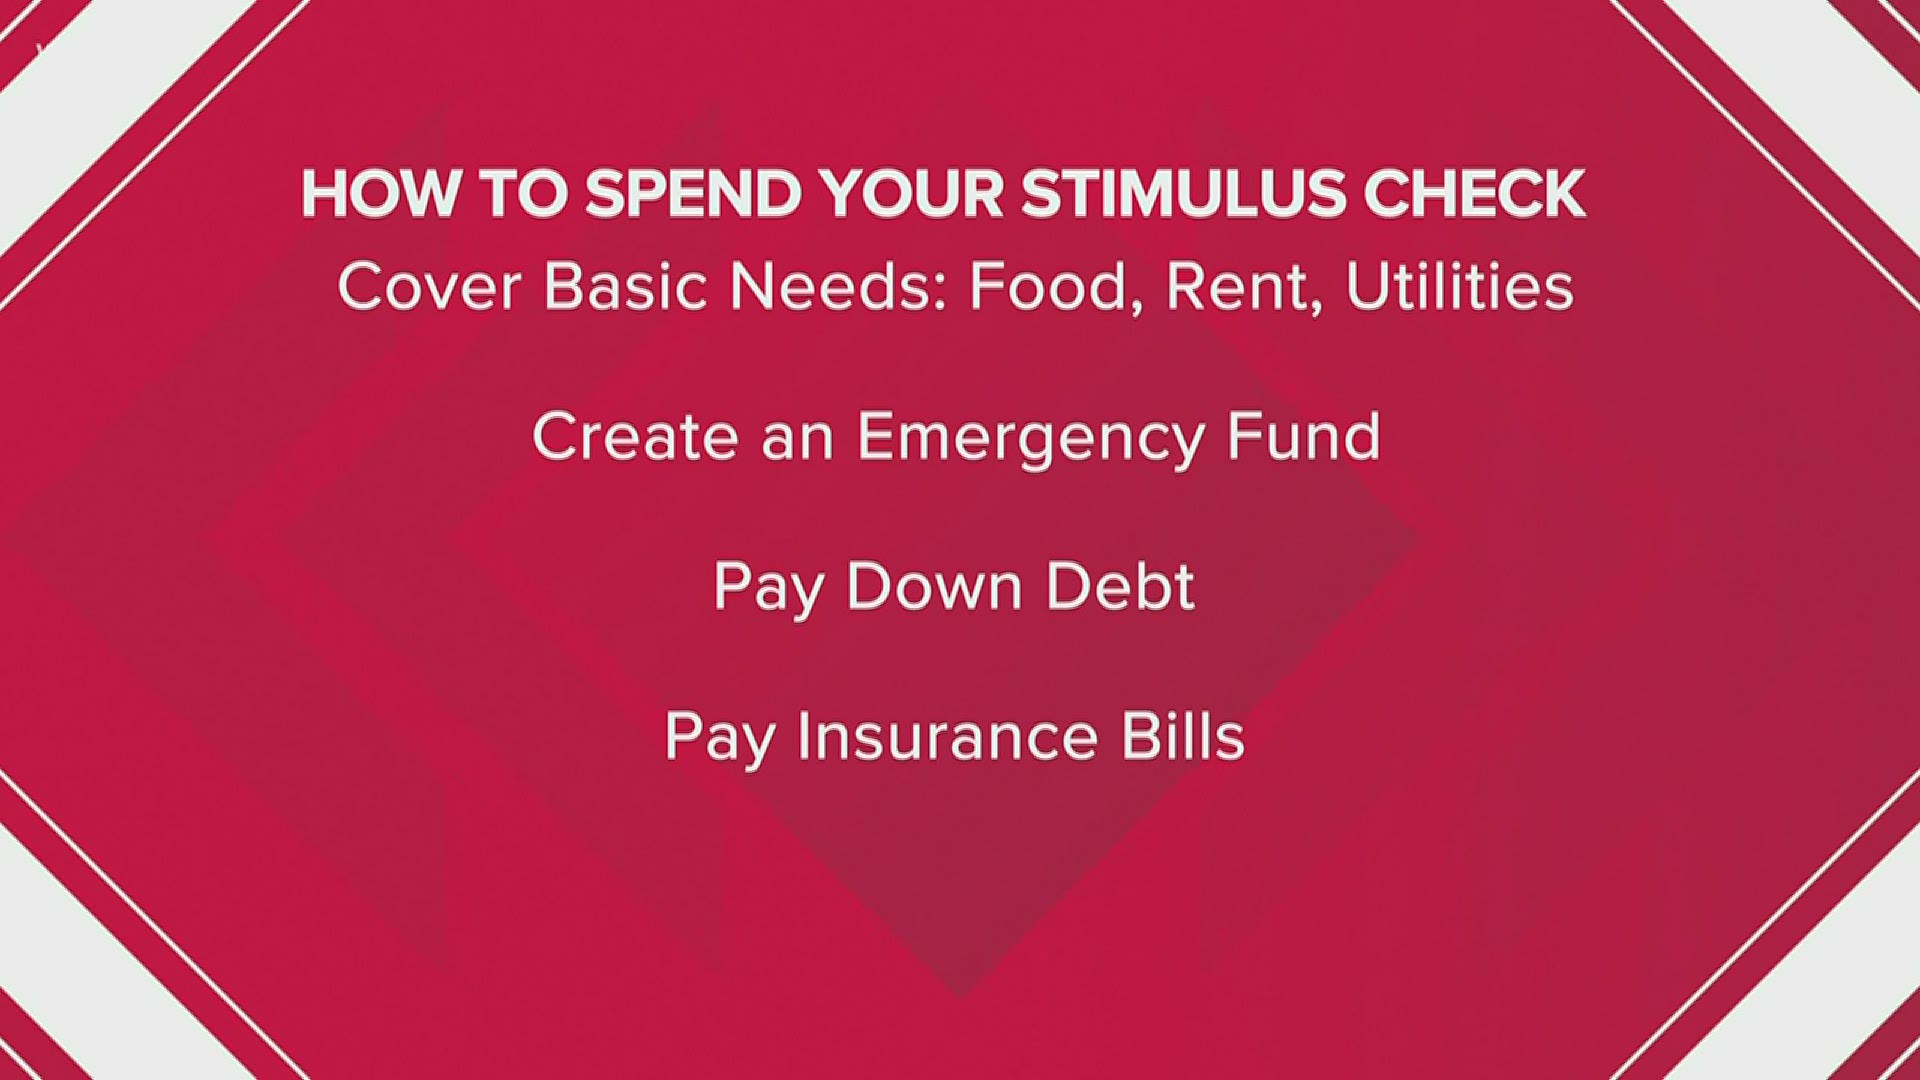 Gilmore, Jasion, Mahler gives some advice on how to make your stimulus check count when money is tight.